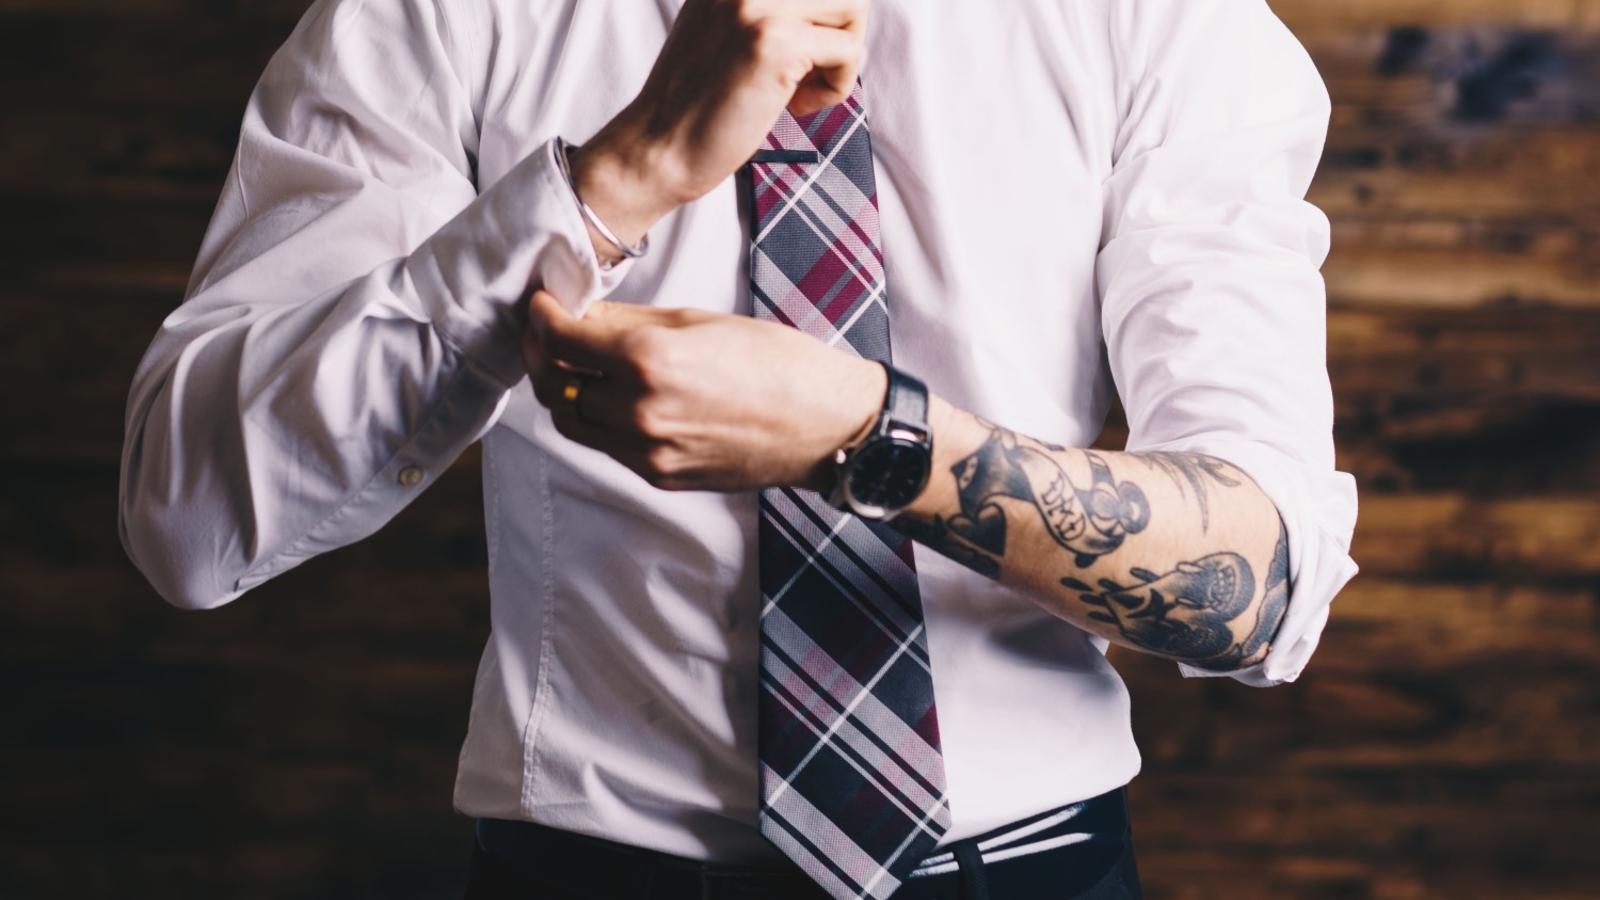 Finance professionals boss said this about her tattooed arms A viral  LinkedIn post